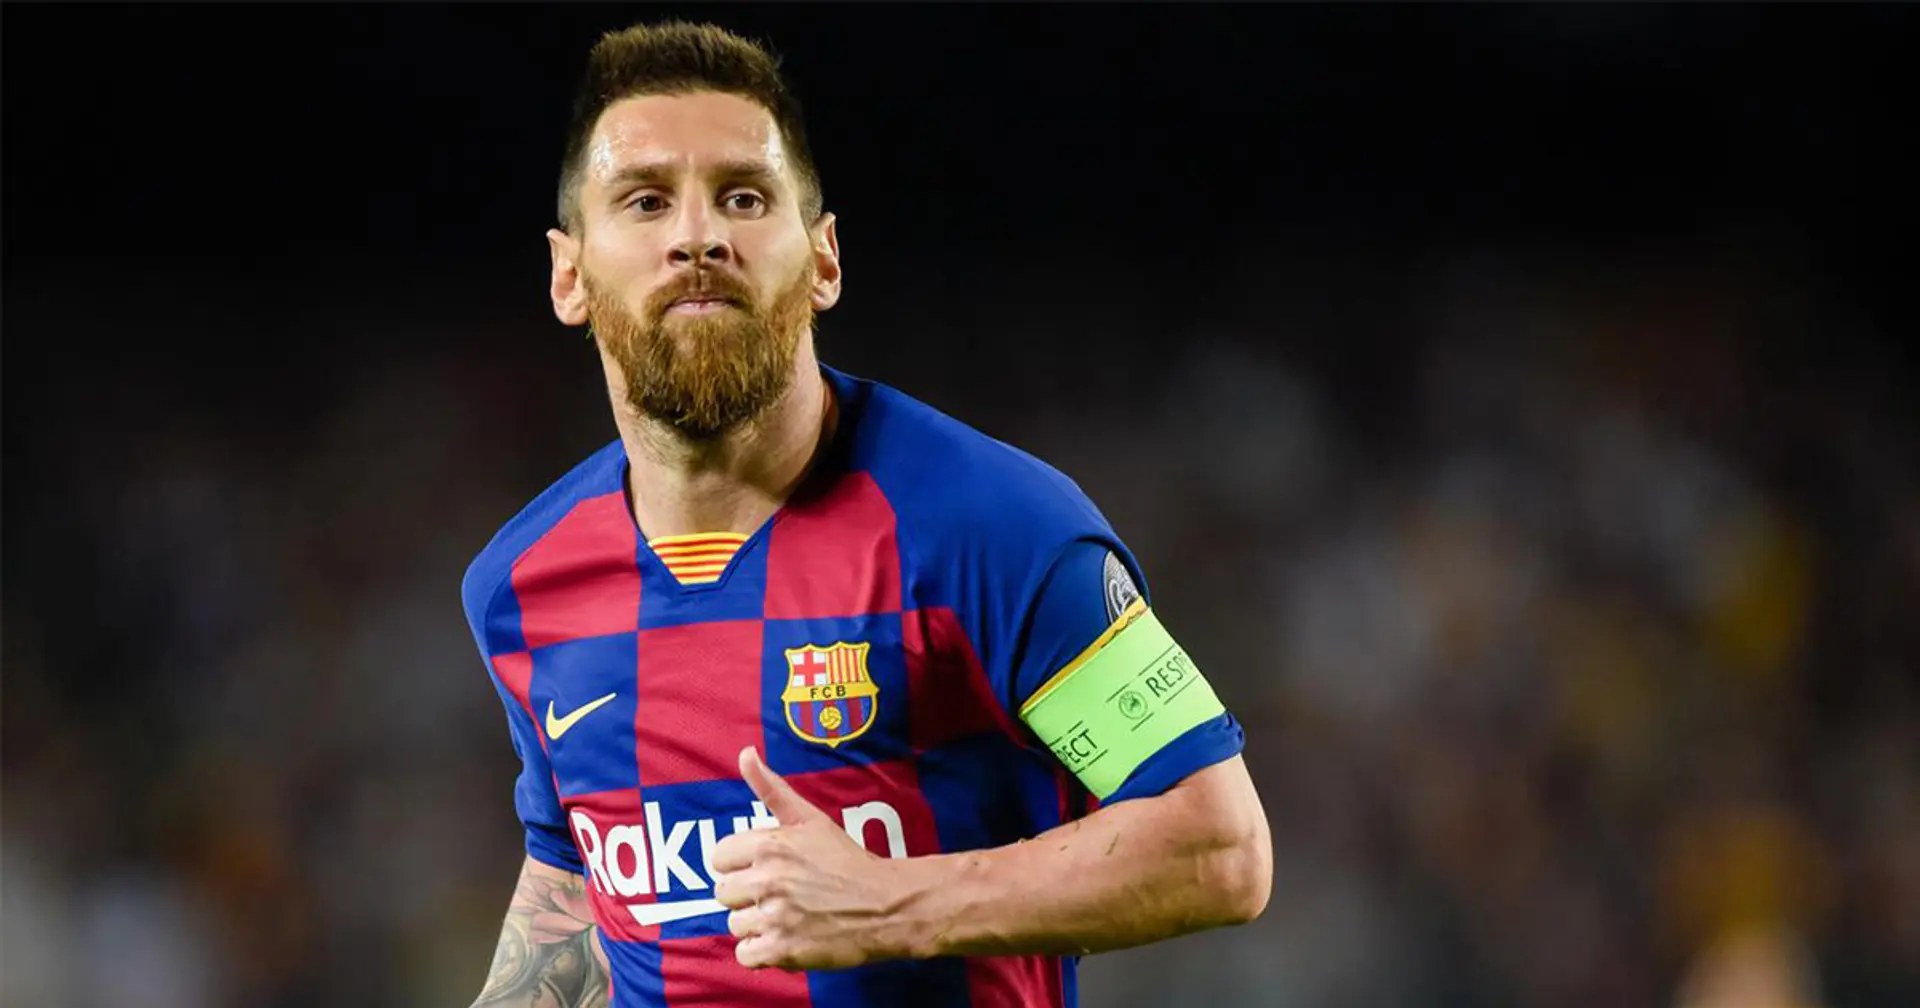 Man City said to offer Messi €750m deal; cosmic contract terms revealed